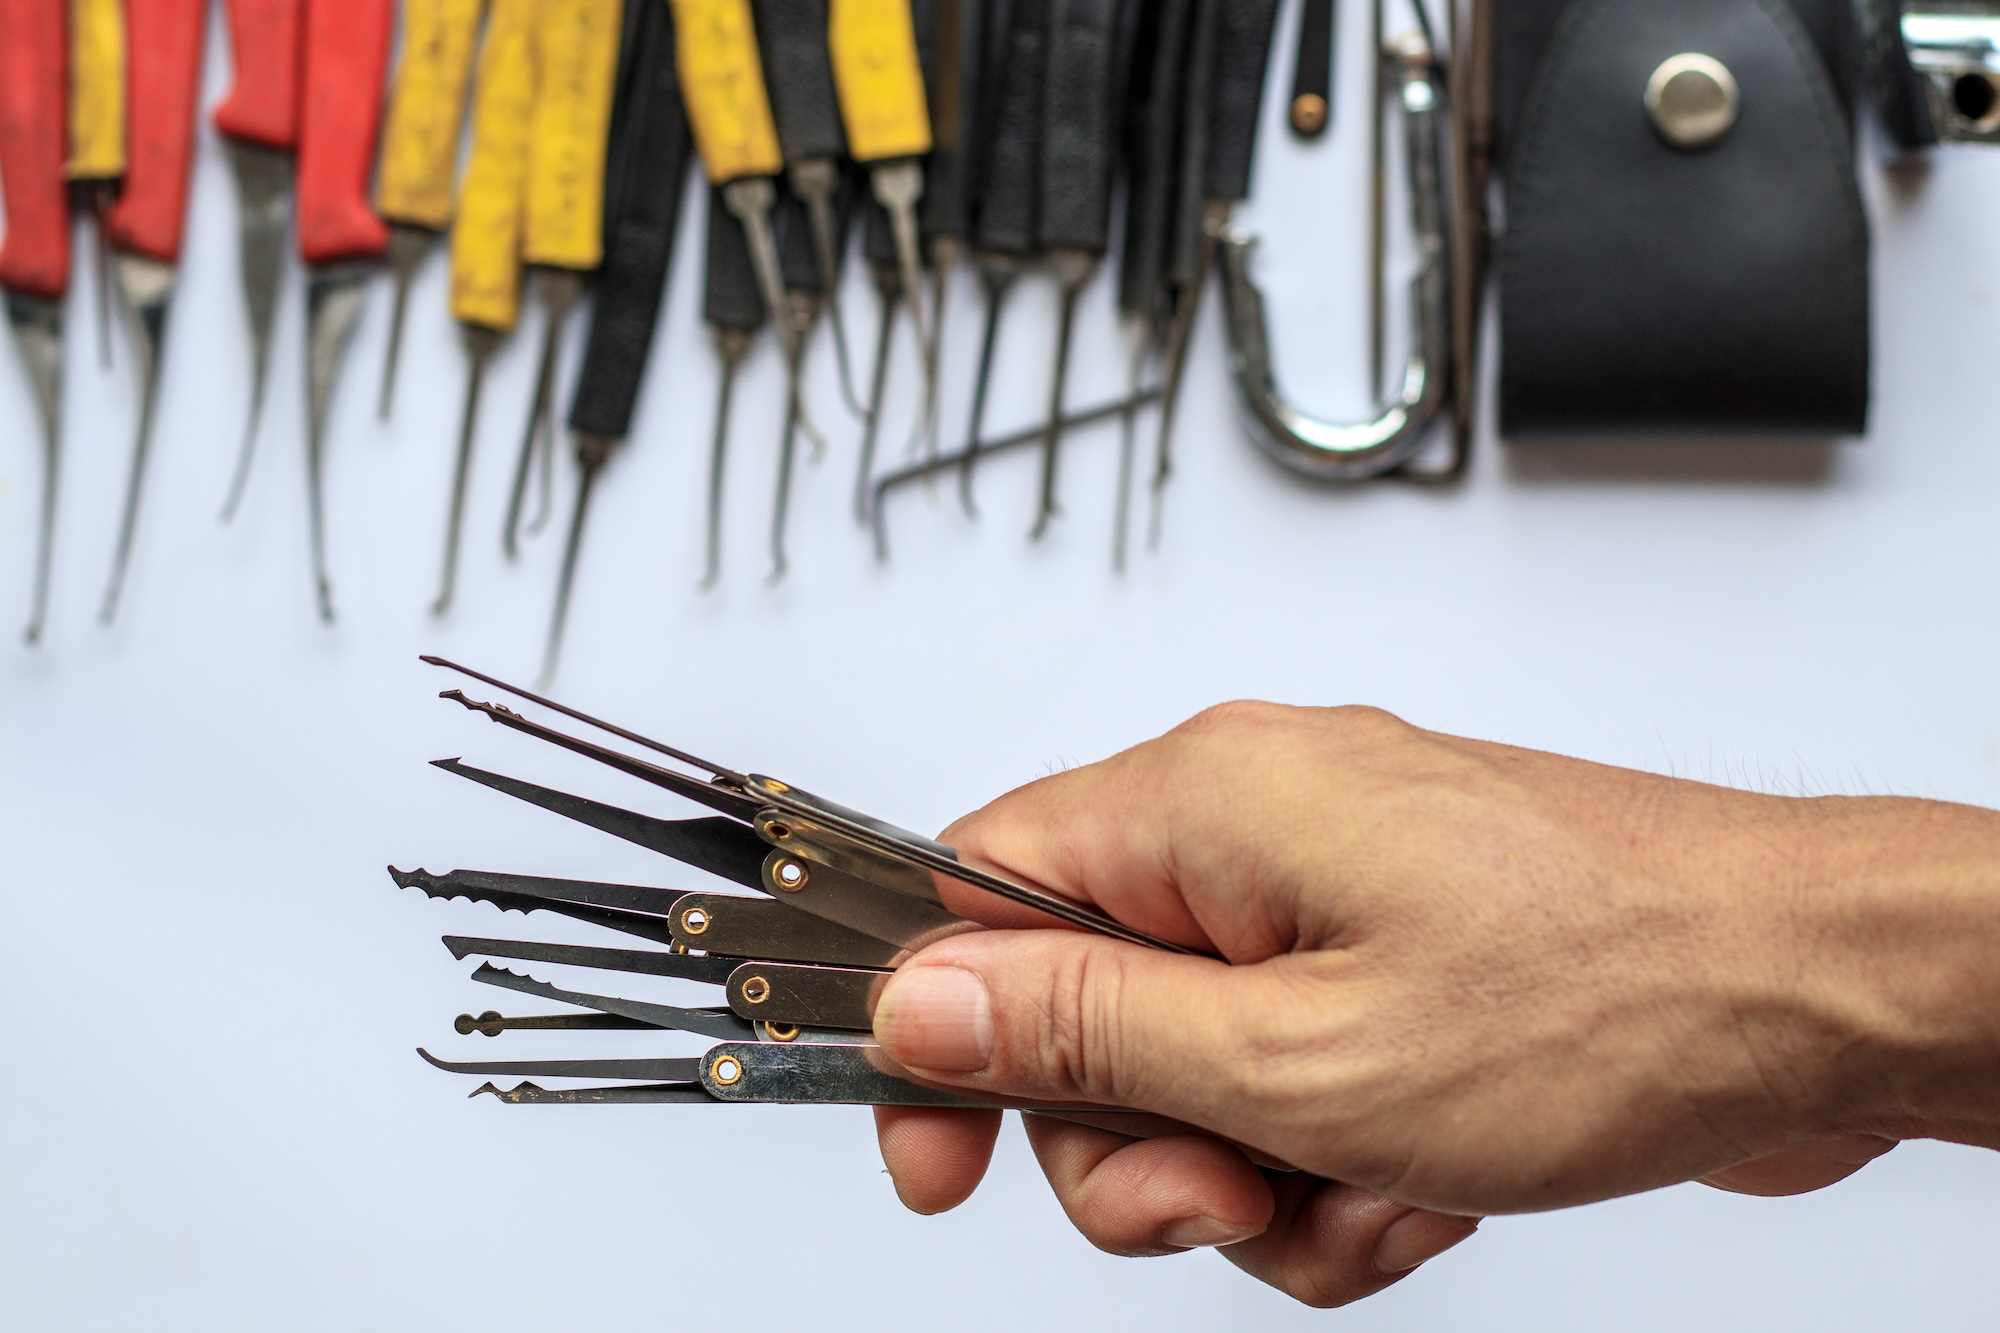 Photograph of a hand holding a selection of tools